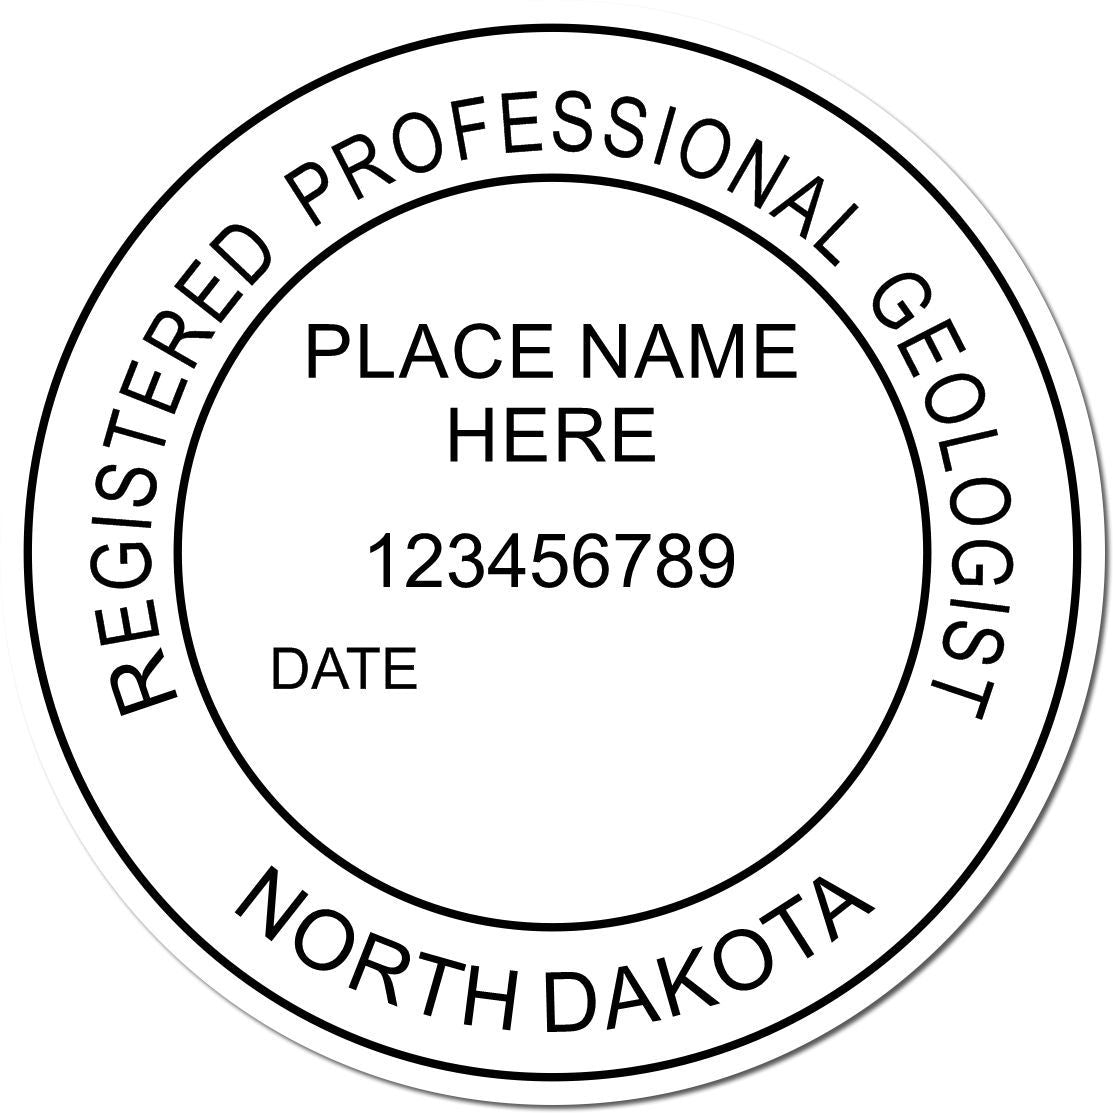 This paper is stamped with a sample imprint of the Slim Pre-Inked North Dakota Professional Geologist Seal Stamp, signifying its quality and reliability.